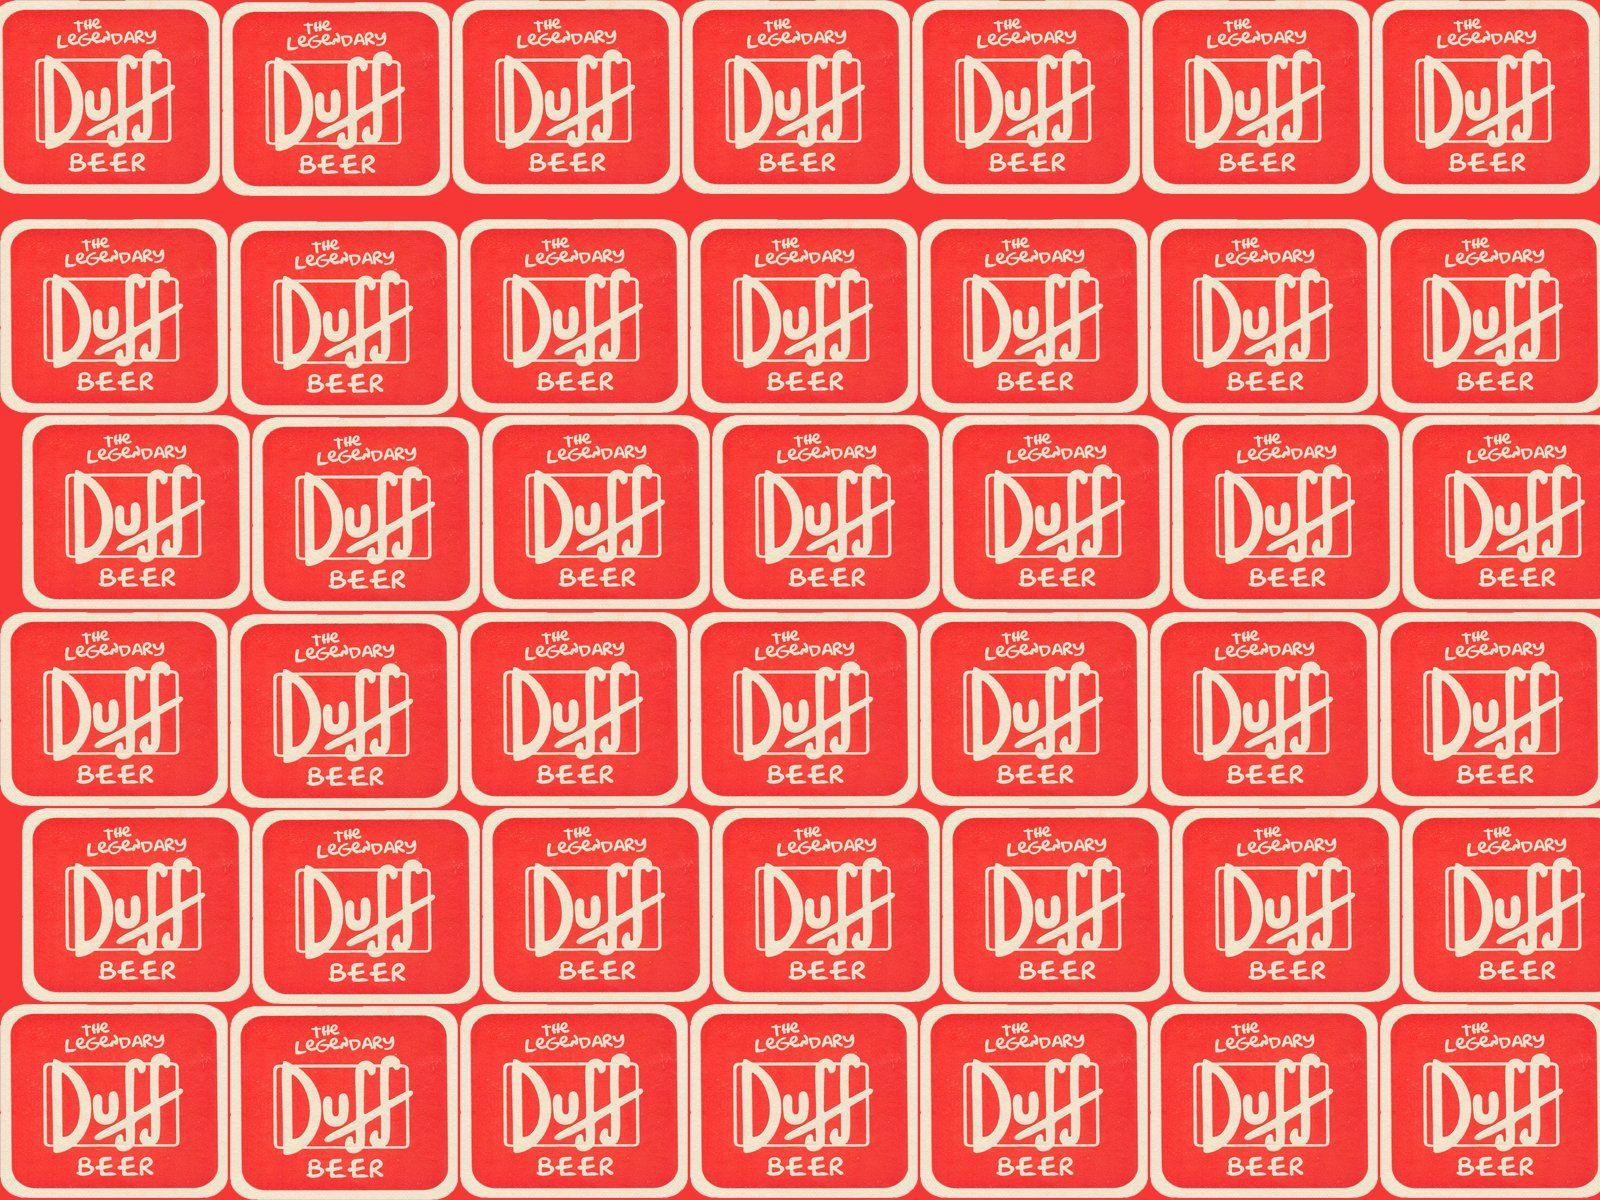 duff beer Wallpaper and Background Imagex1200